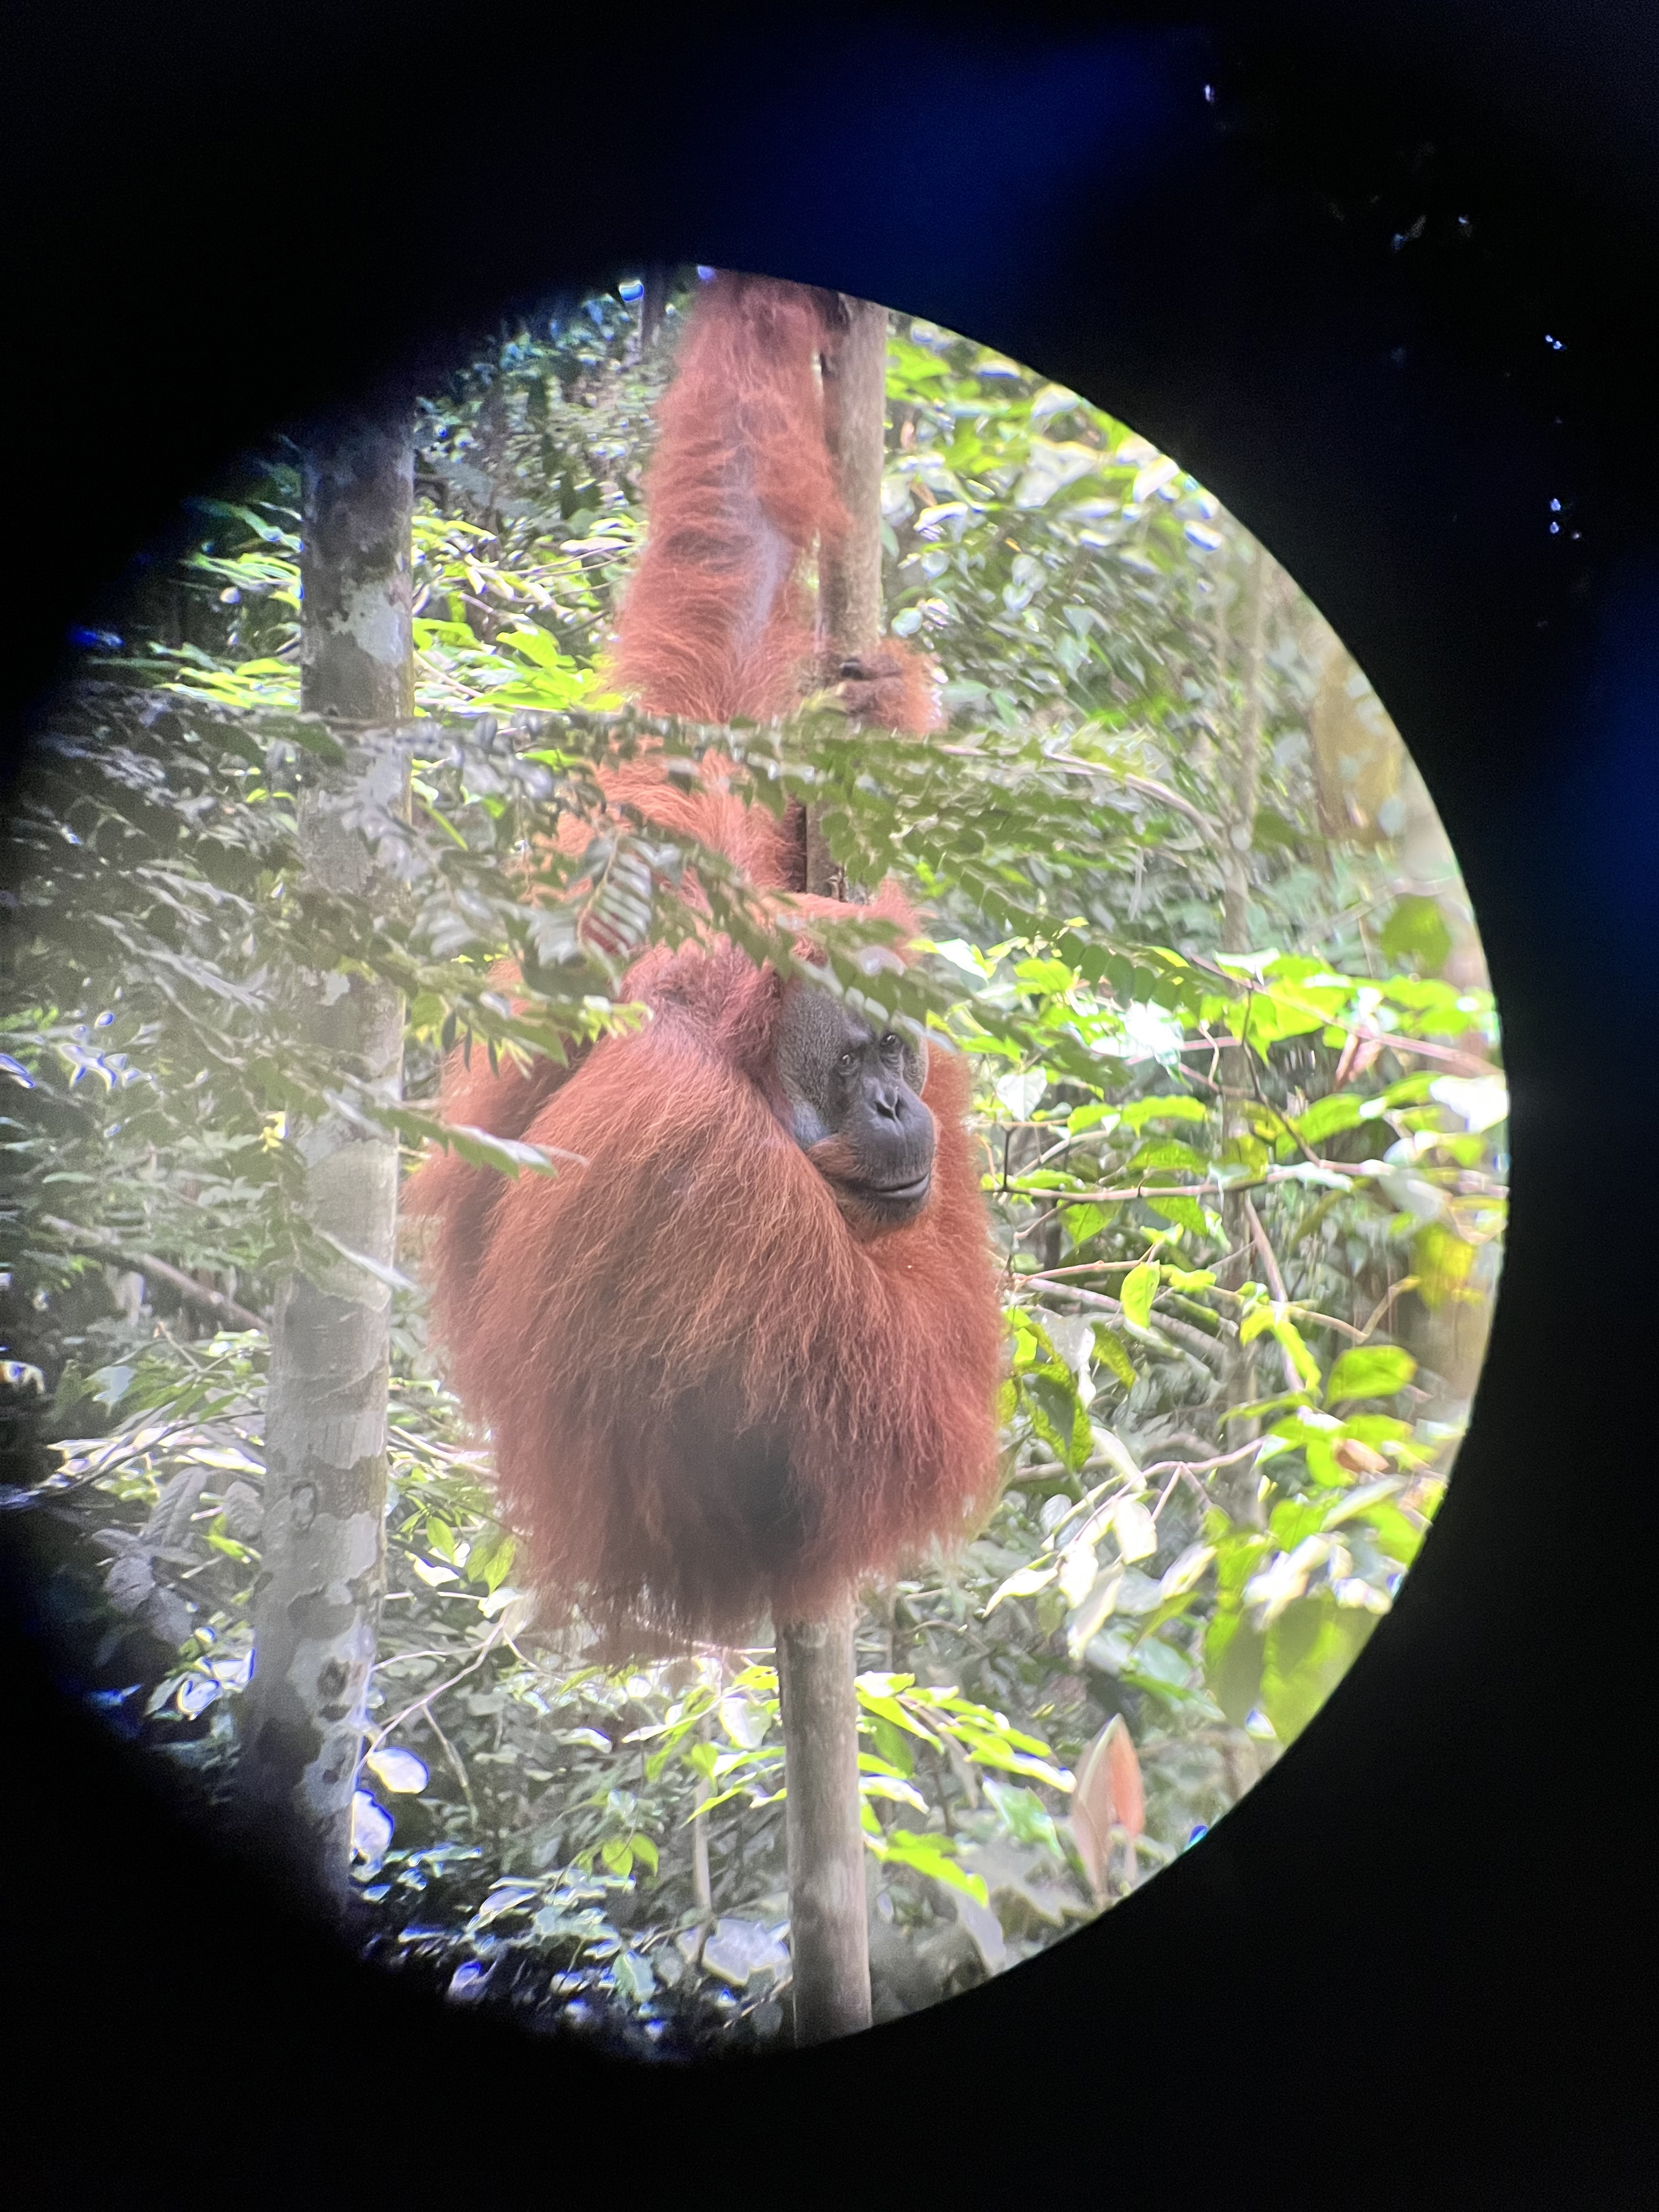 Circular photo of orangutan hanging from tree in a stand of trees